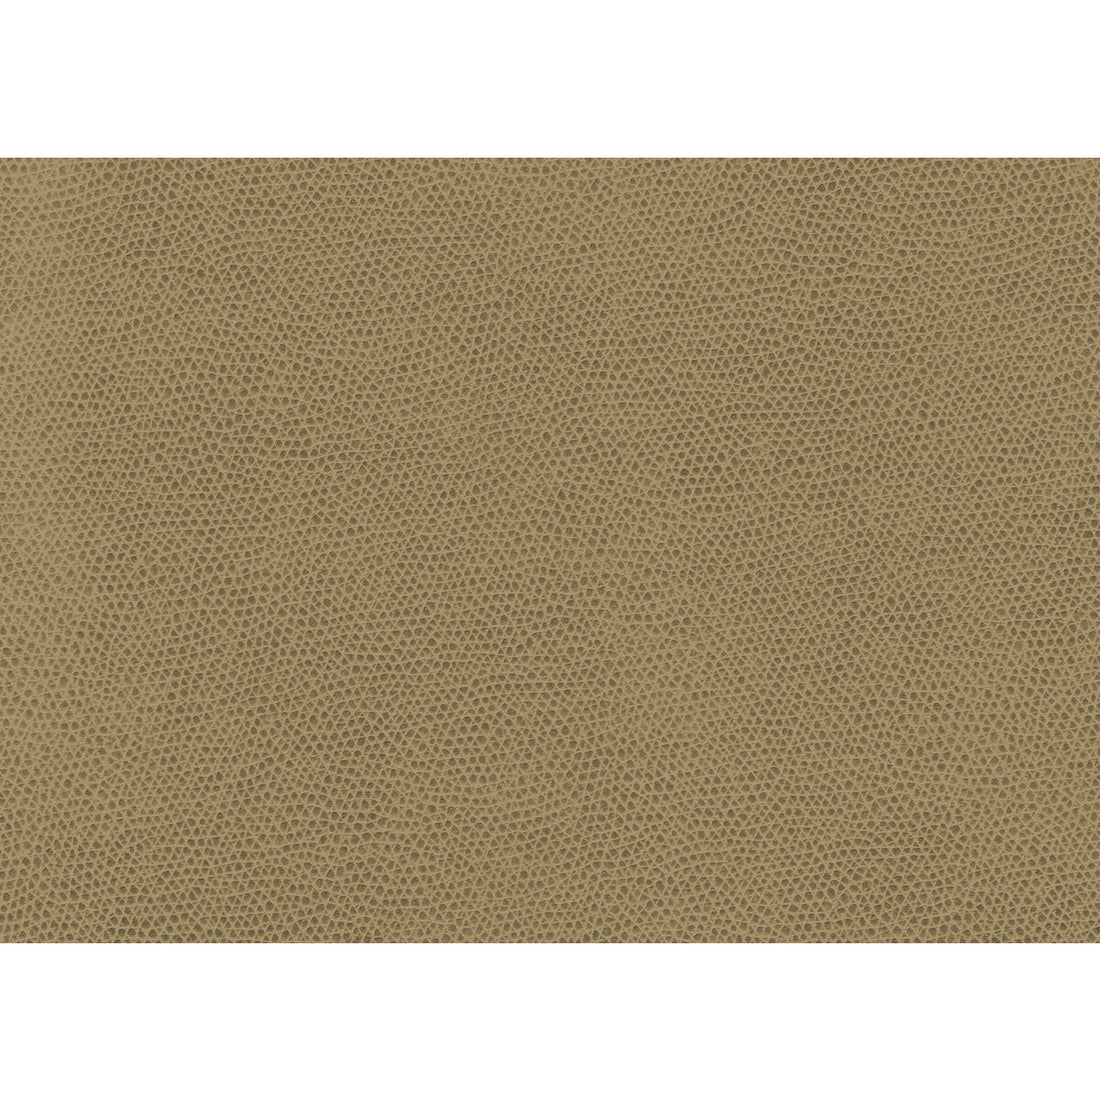 Ophidian fabric in wheat color - pattern OPHIDIAN.16.0 - by Kravet Contract in the Contract Sta-Kleen collection